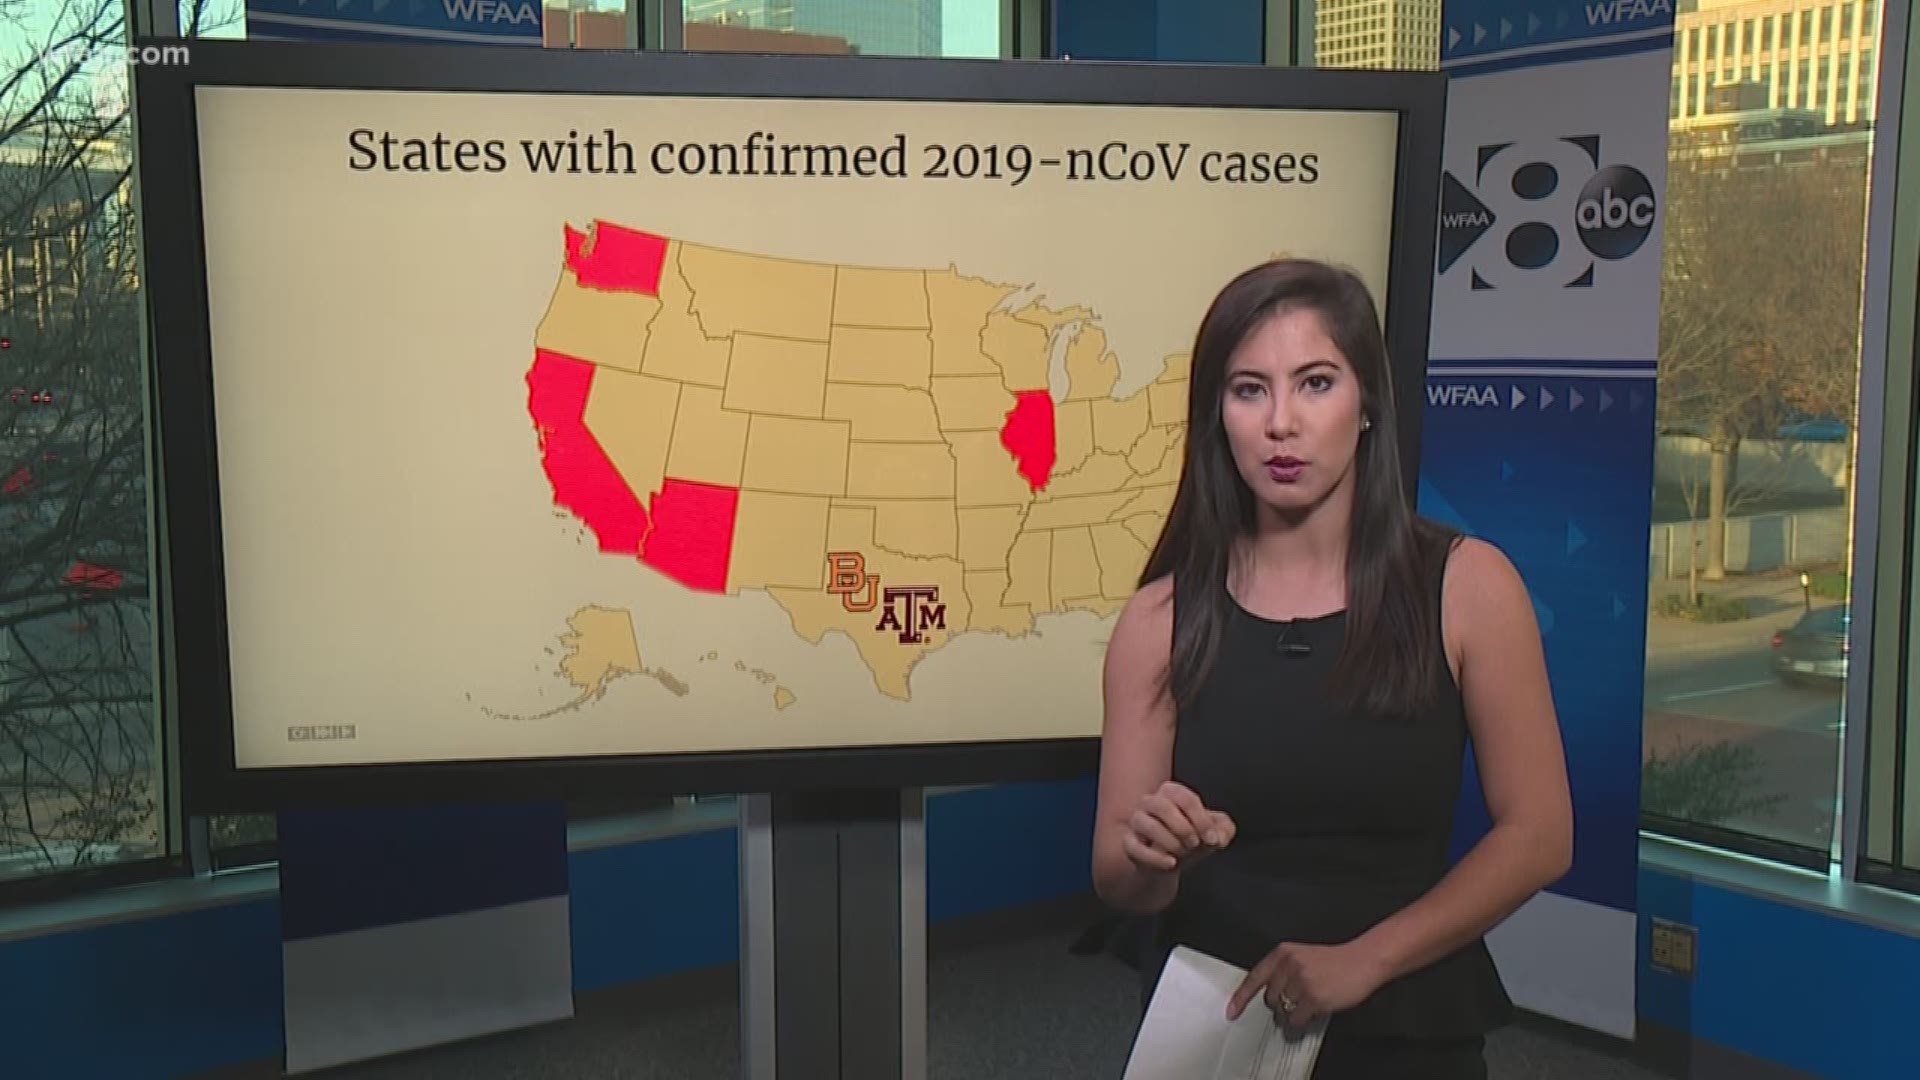 Two new confirmed cases were announced Sunday — one in Los Angeles County in California and the other in Arizona. All of the U.S. patients had traveled to Wuhan.